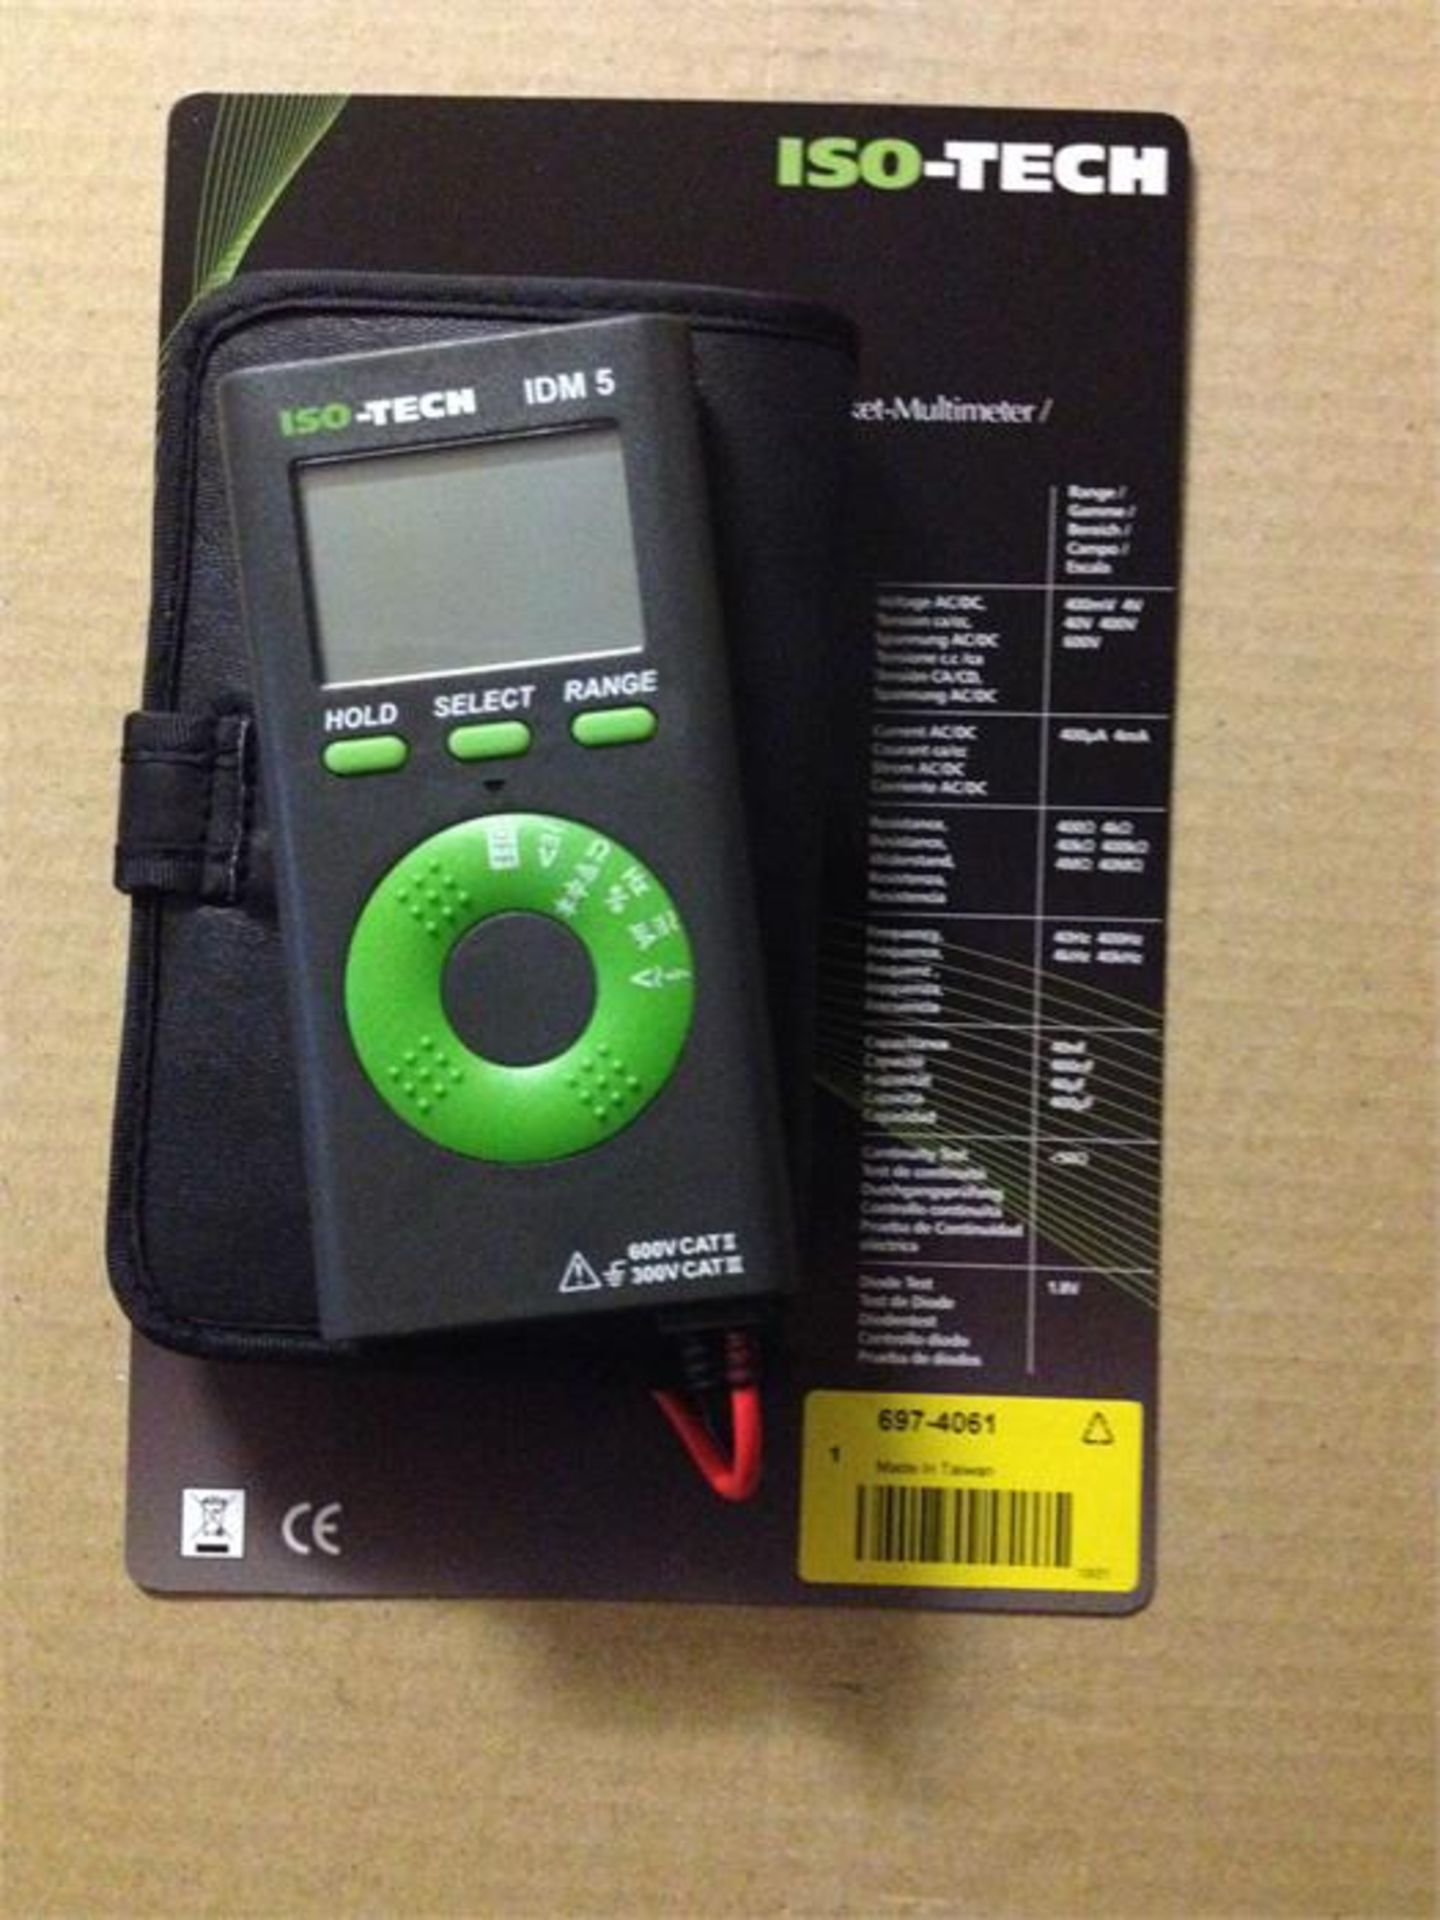 ISO-TECH / RS Components IDM5 Wallet Multimeter